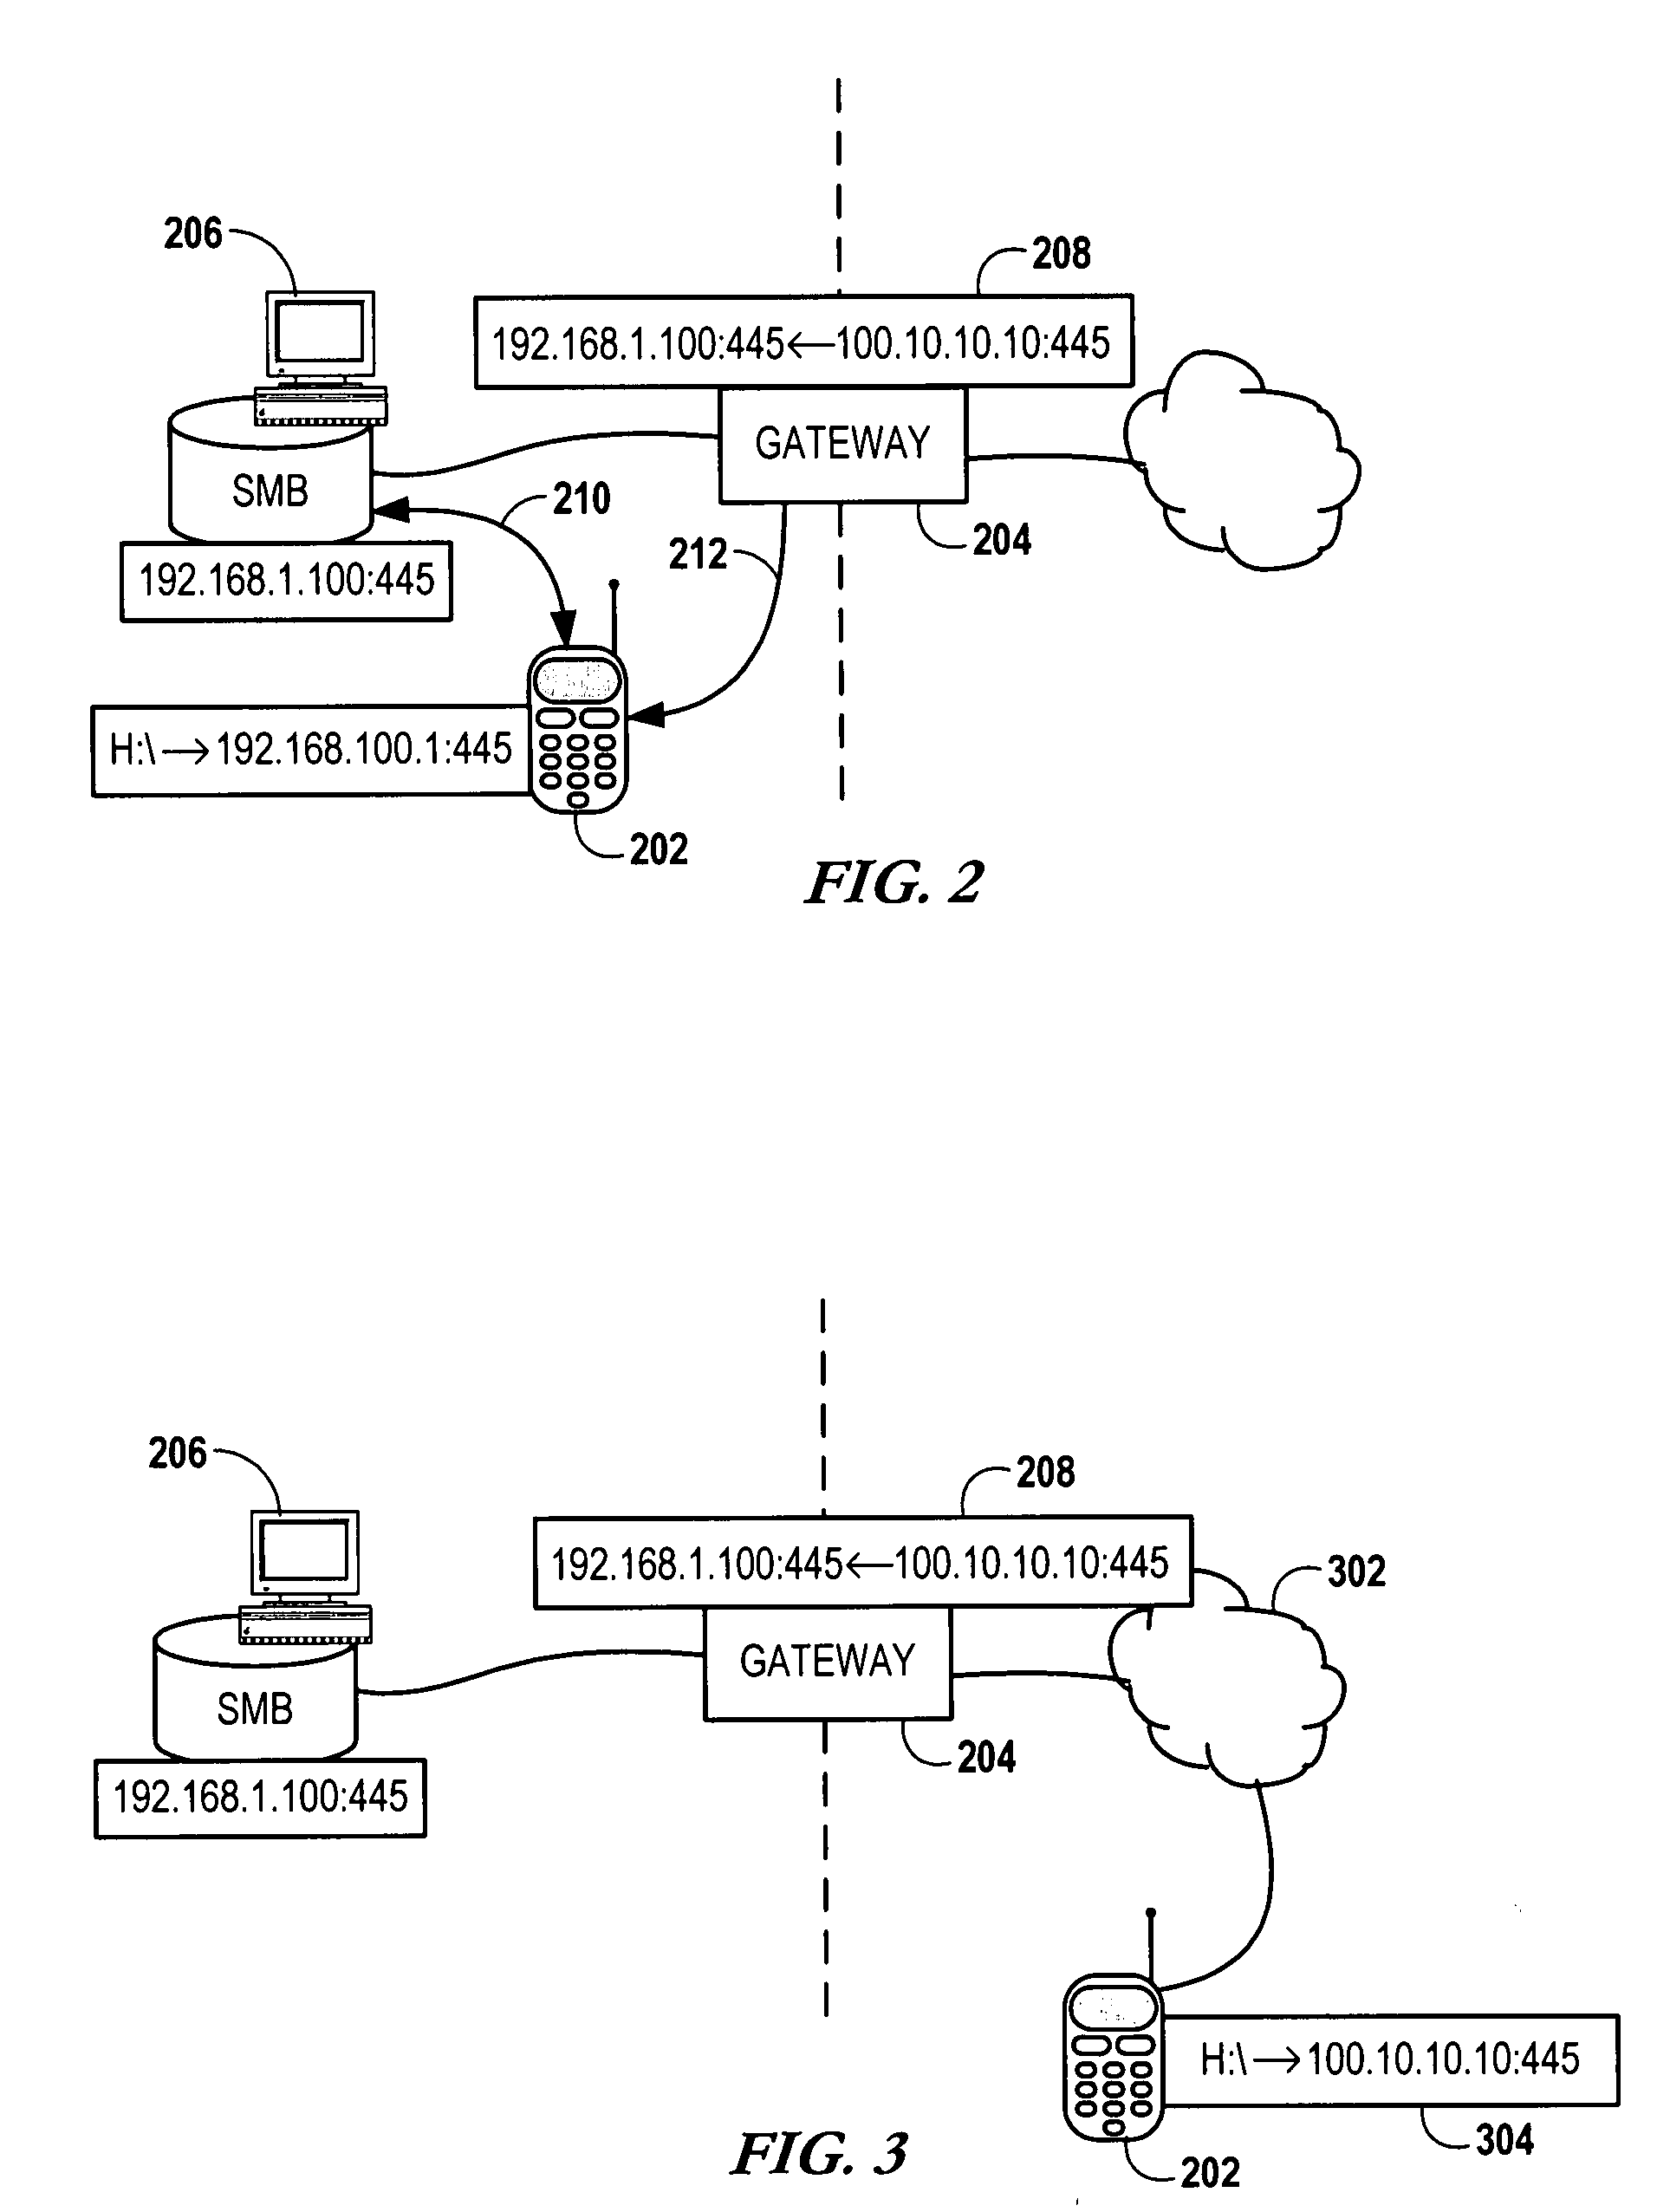 Configuring a user device to remotely access a private network